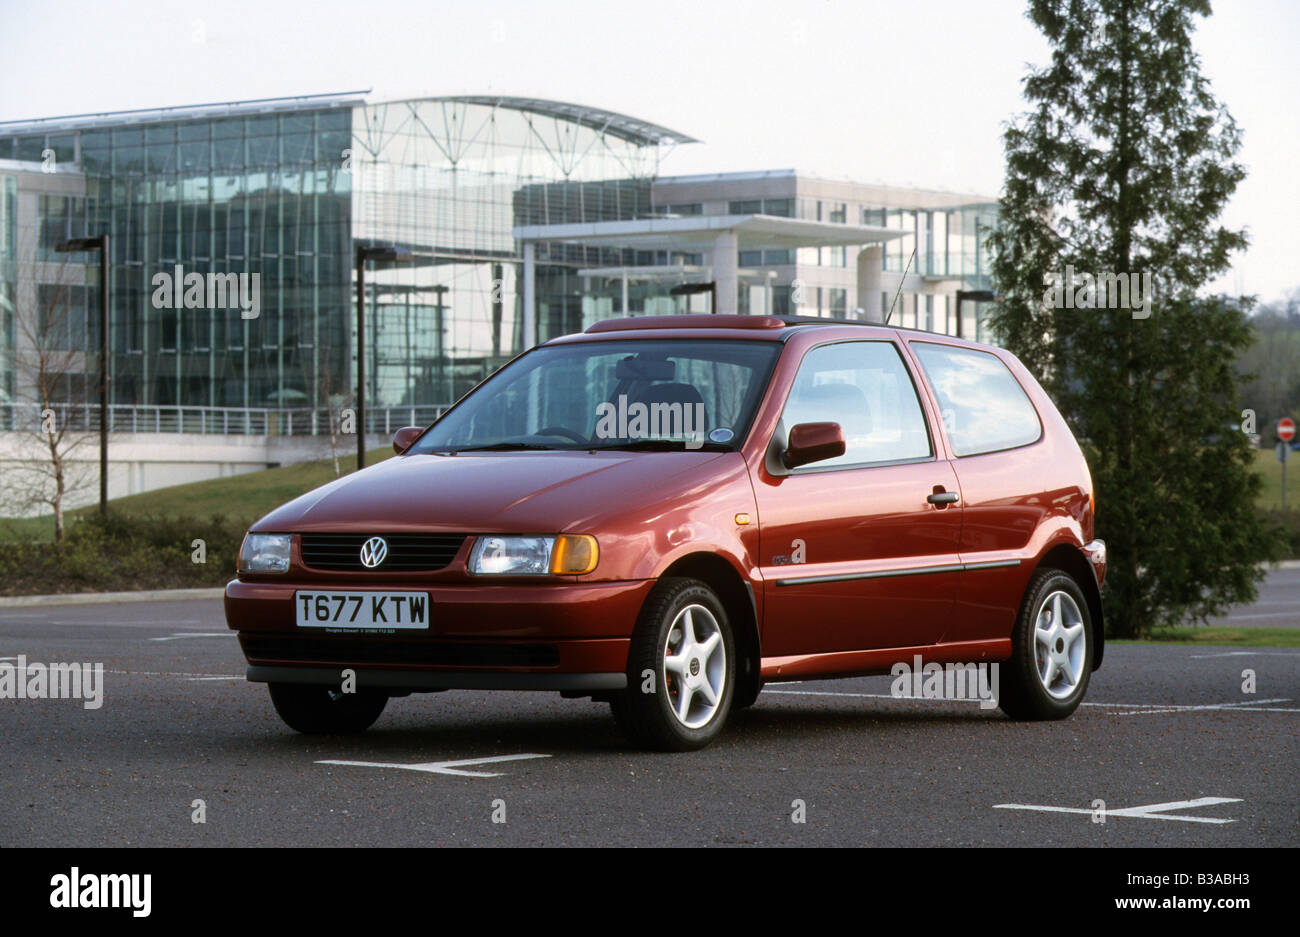 Volkswagen polo photography and images - Alamy